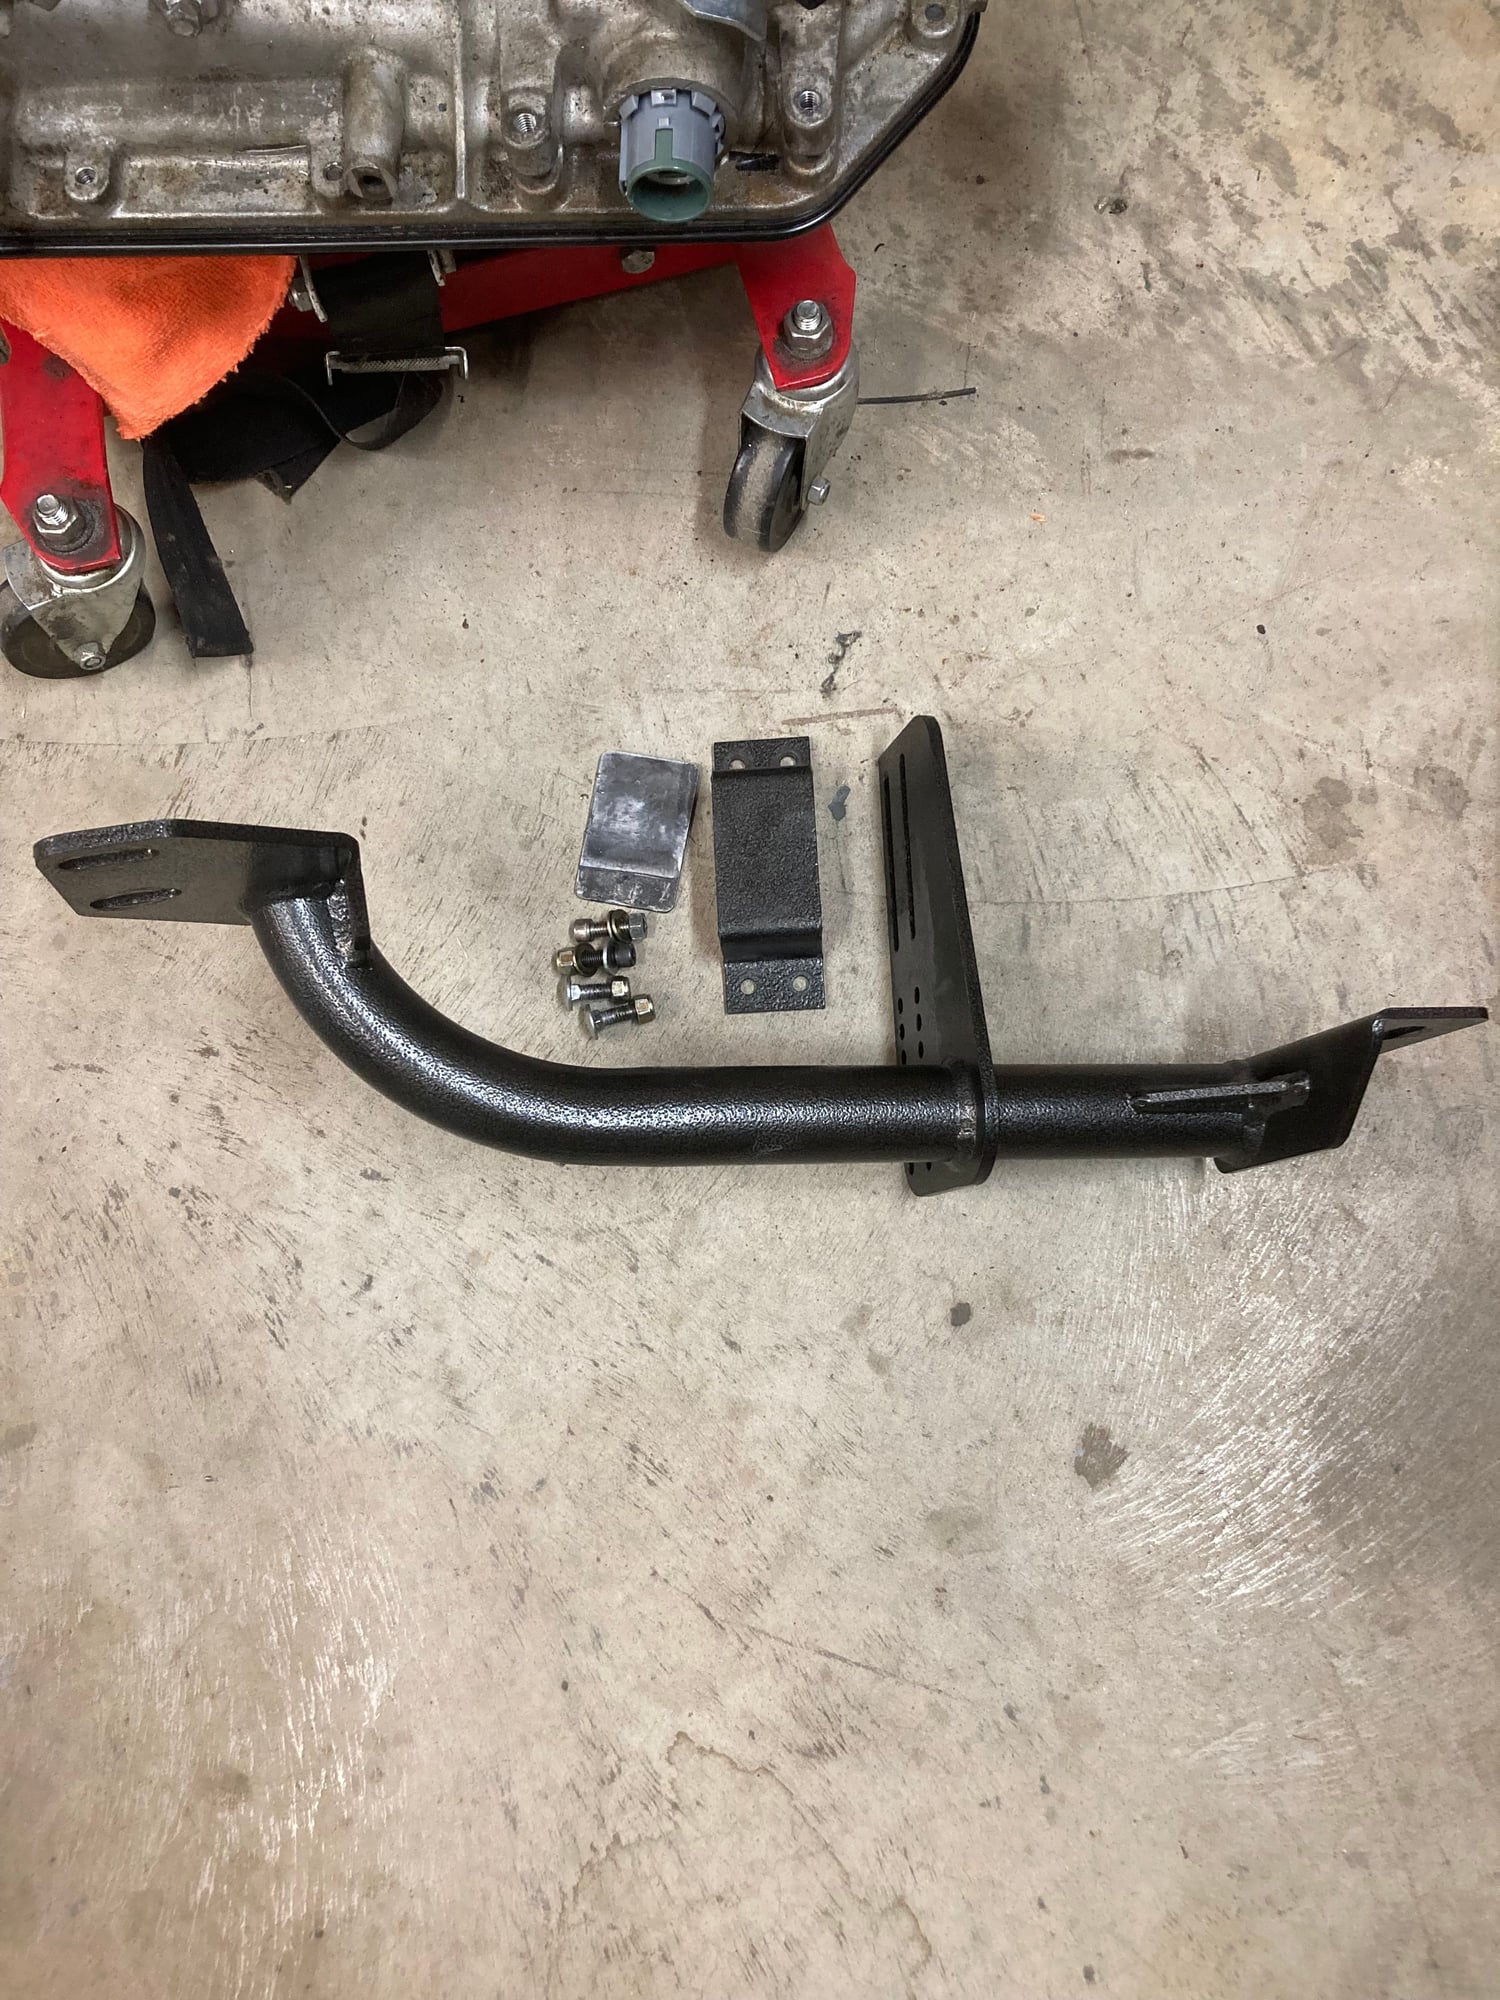 Drivetrain - Bmr 4l80 crossmember - Used - 1998 to 2002 Chevrolet Camaro - North Little Rock, AR 72118, United States